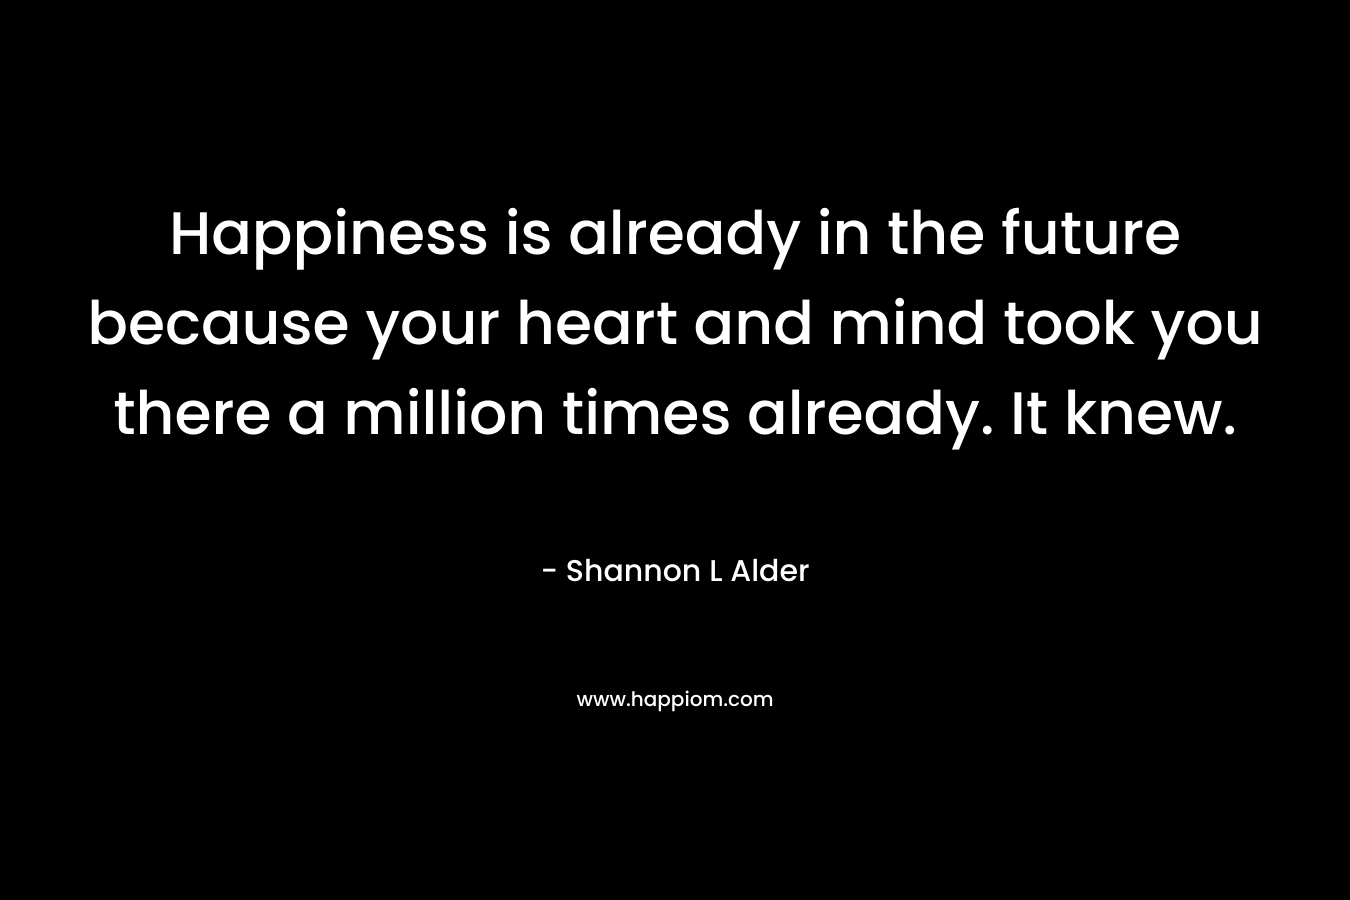 Happiness is already in the future because your heart and mind took you there a million times already. It knew.